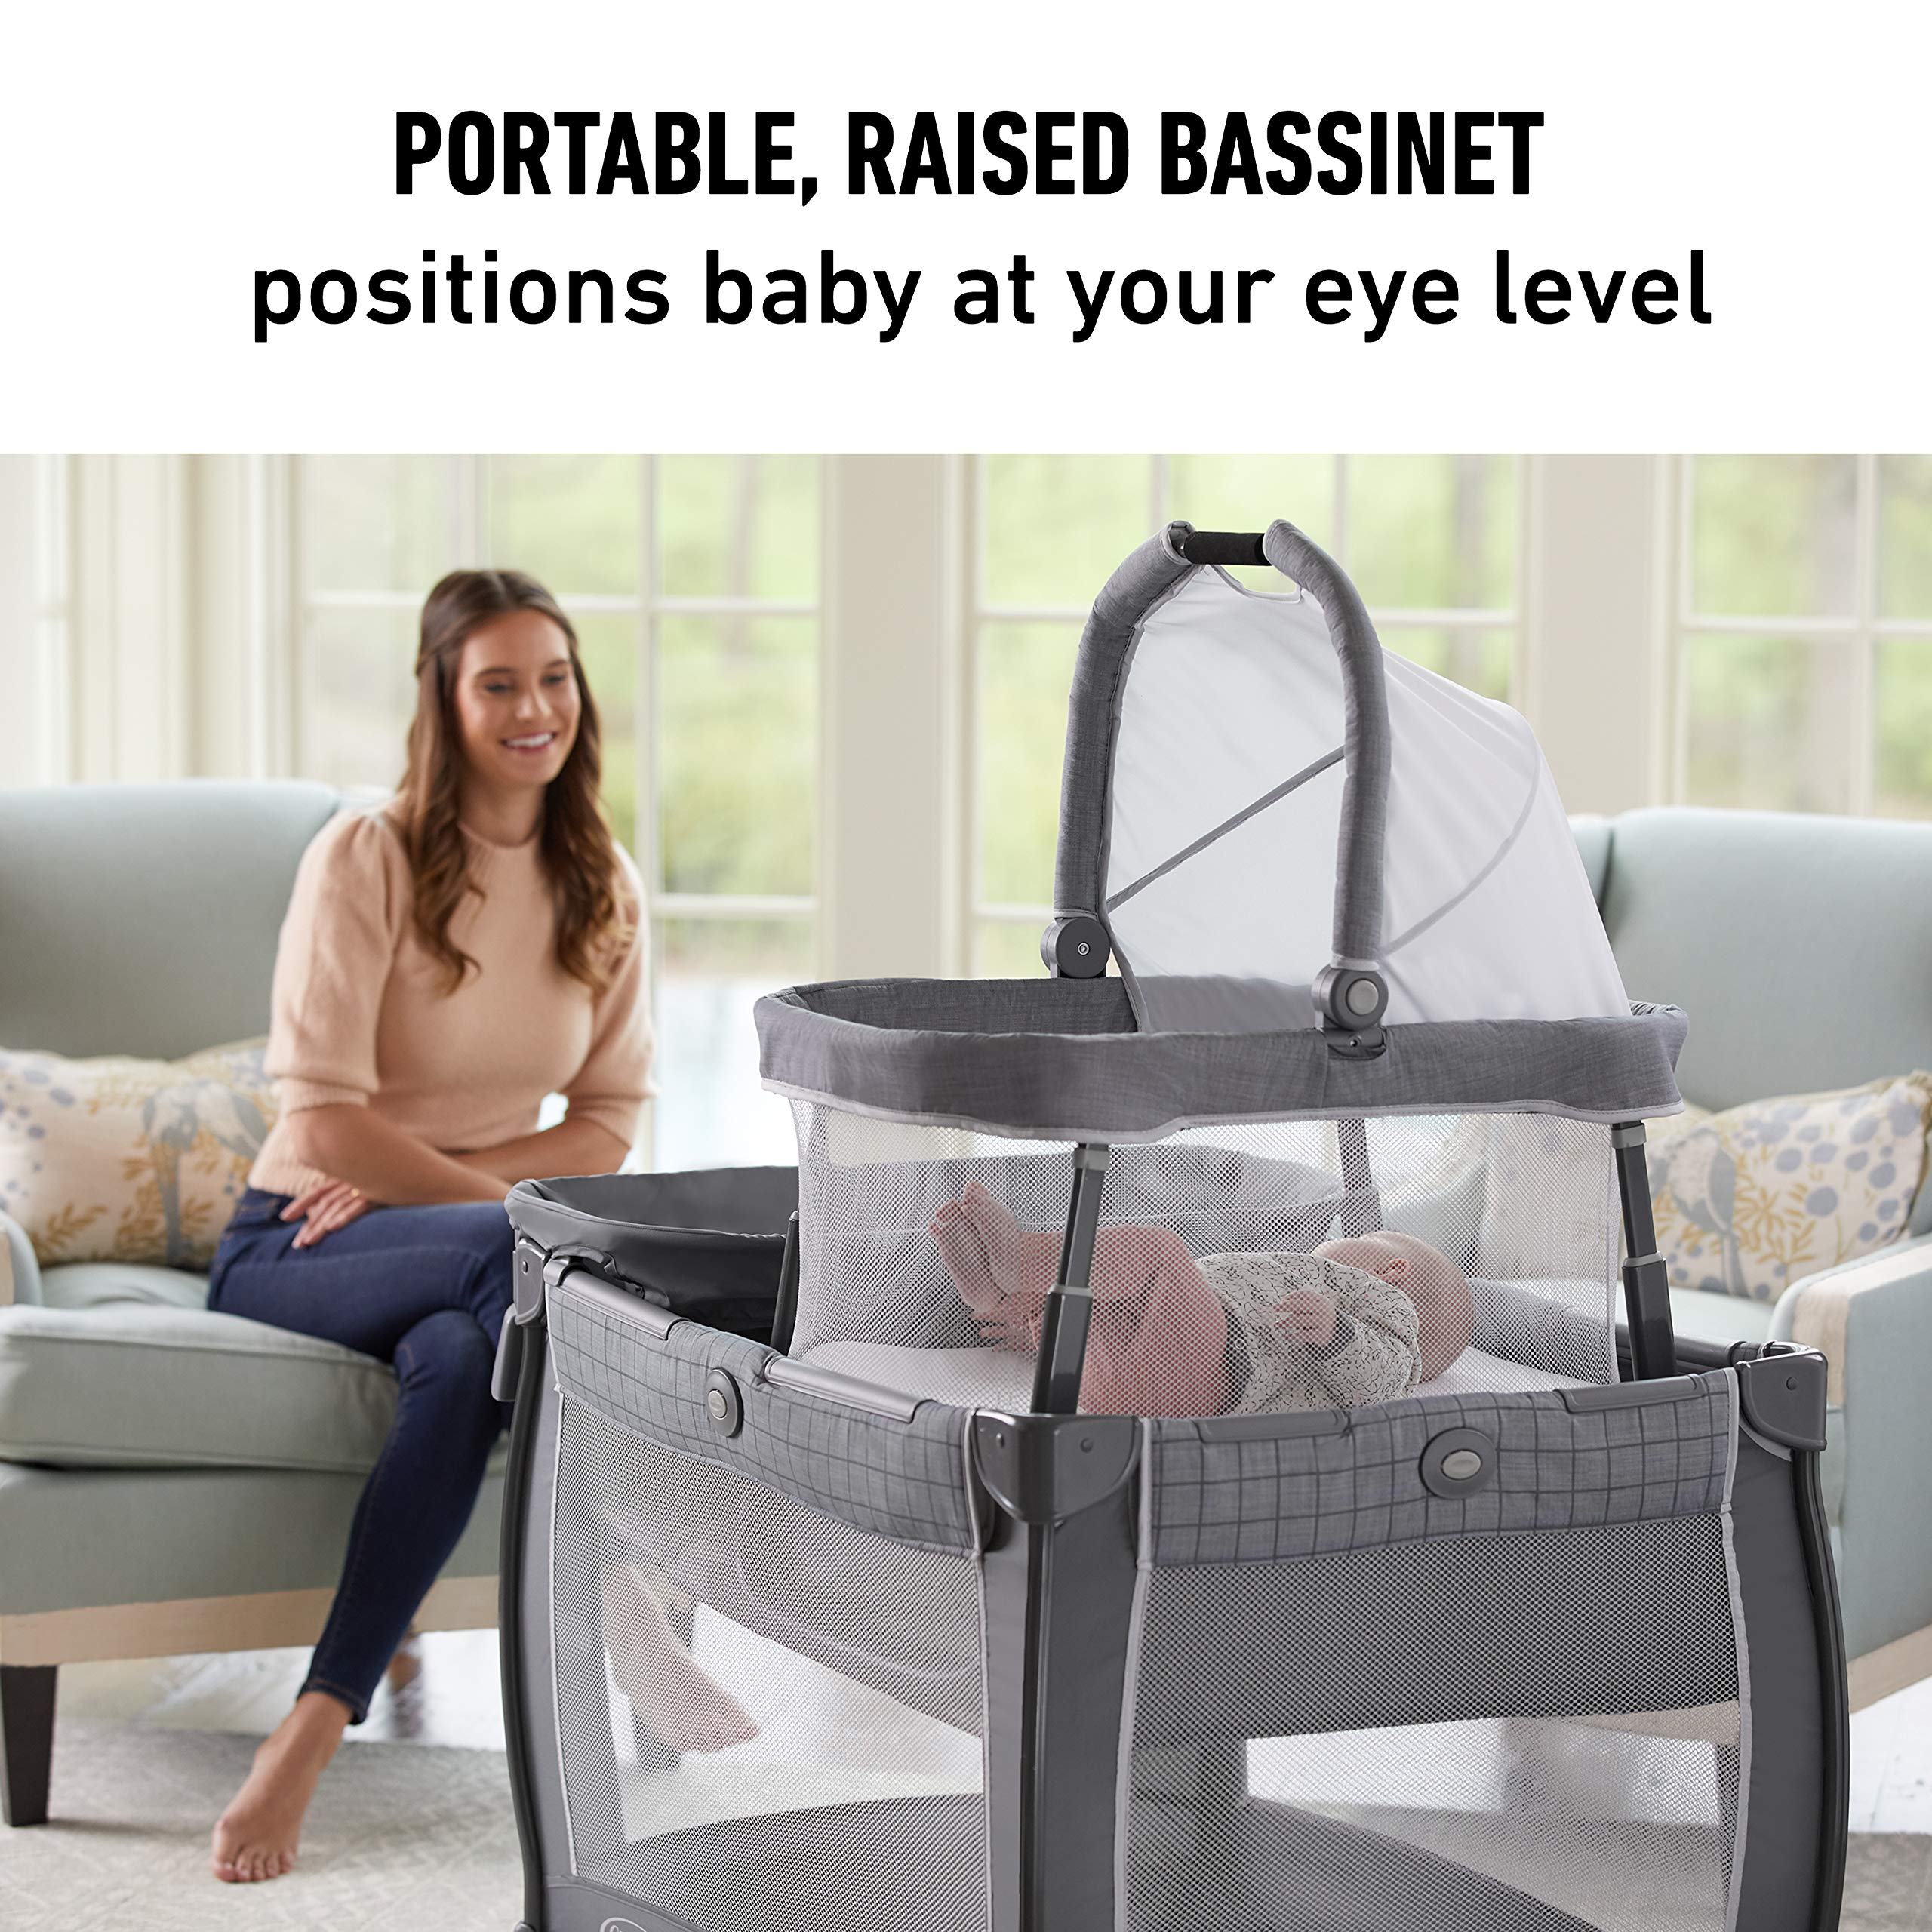 Graco Pack 'n Play Day2Dream Travel Bassinet Playard Features Portable Bassinet Diaper Changer and More (Lo, Lo, W/Fold Flat Bassinet)